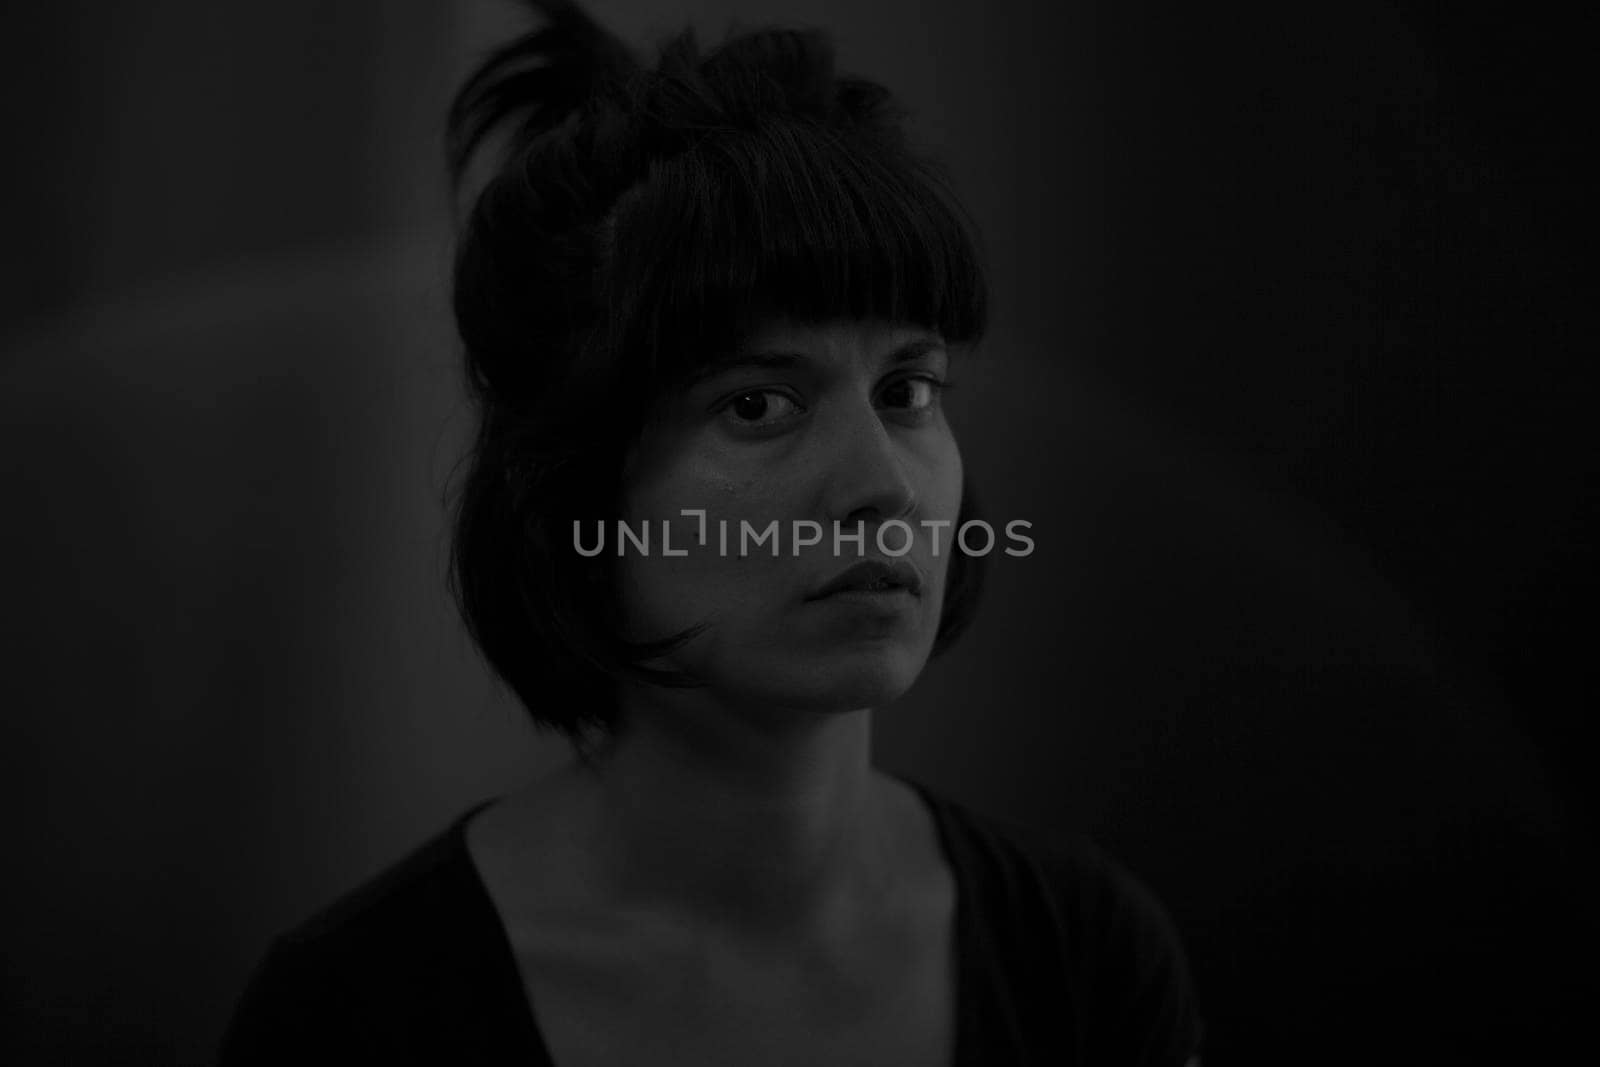 Dramatic portrait of an indian girl on black background